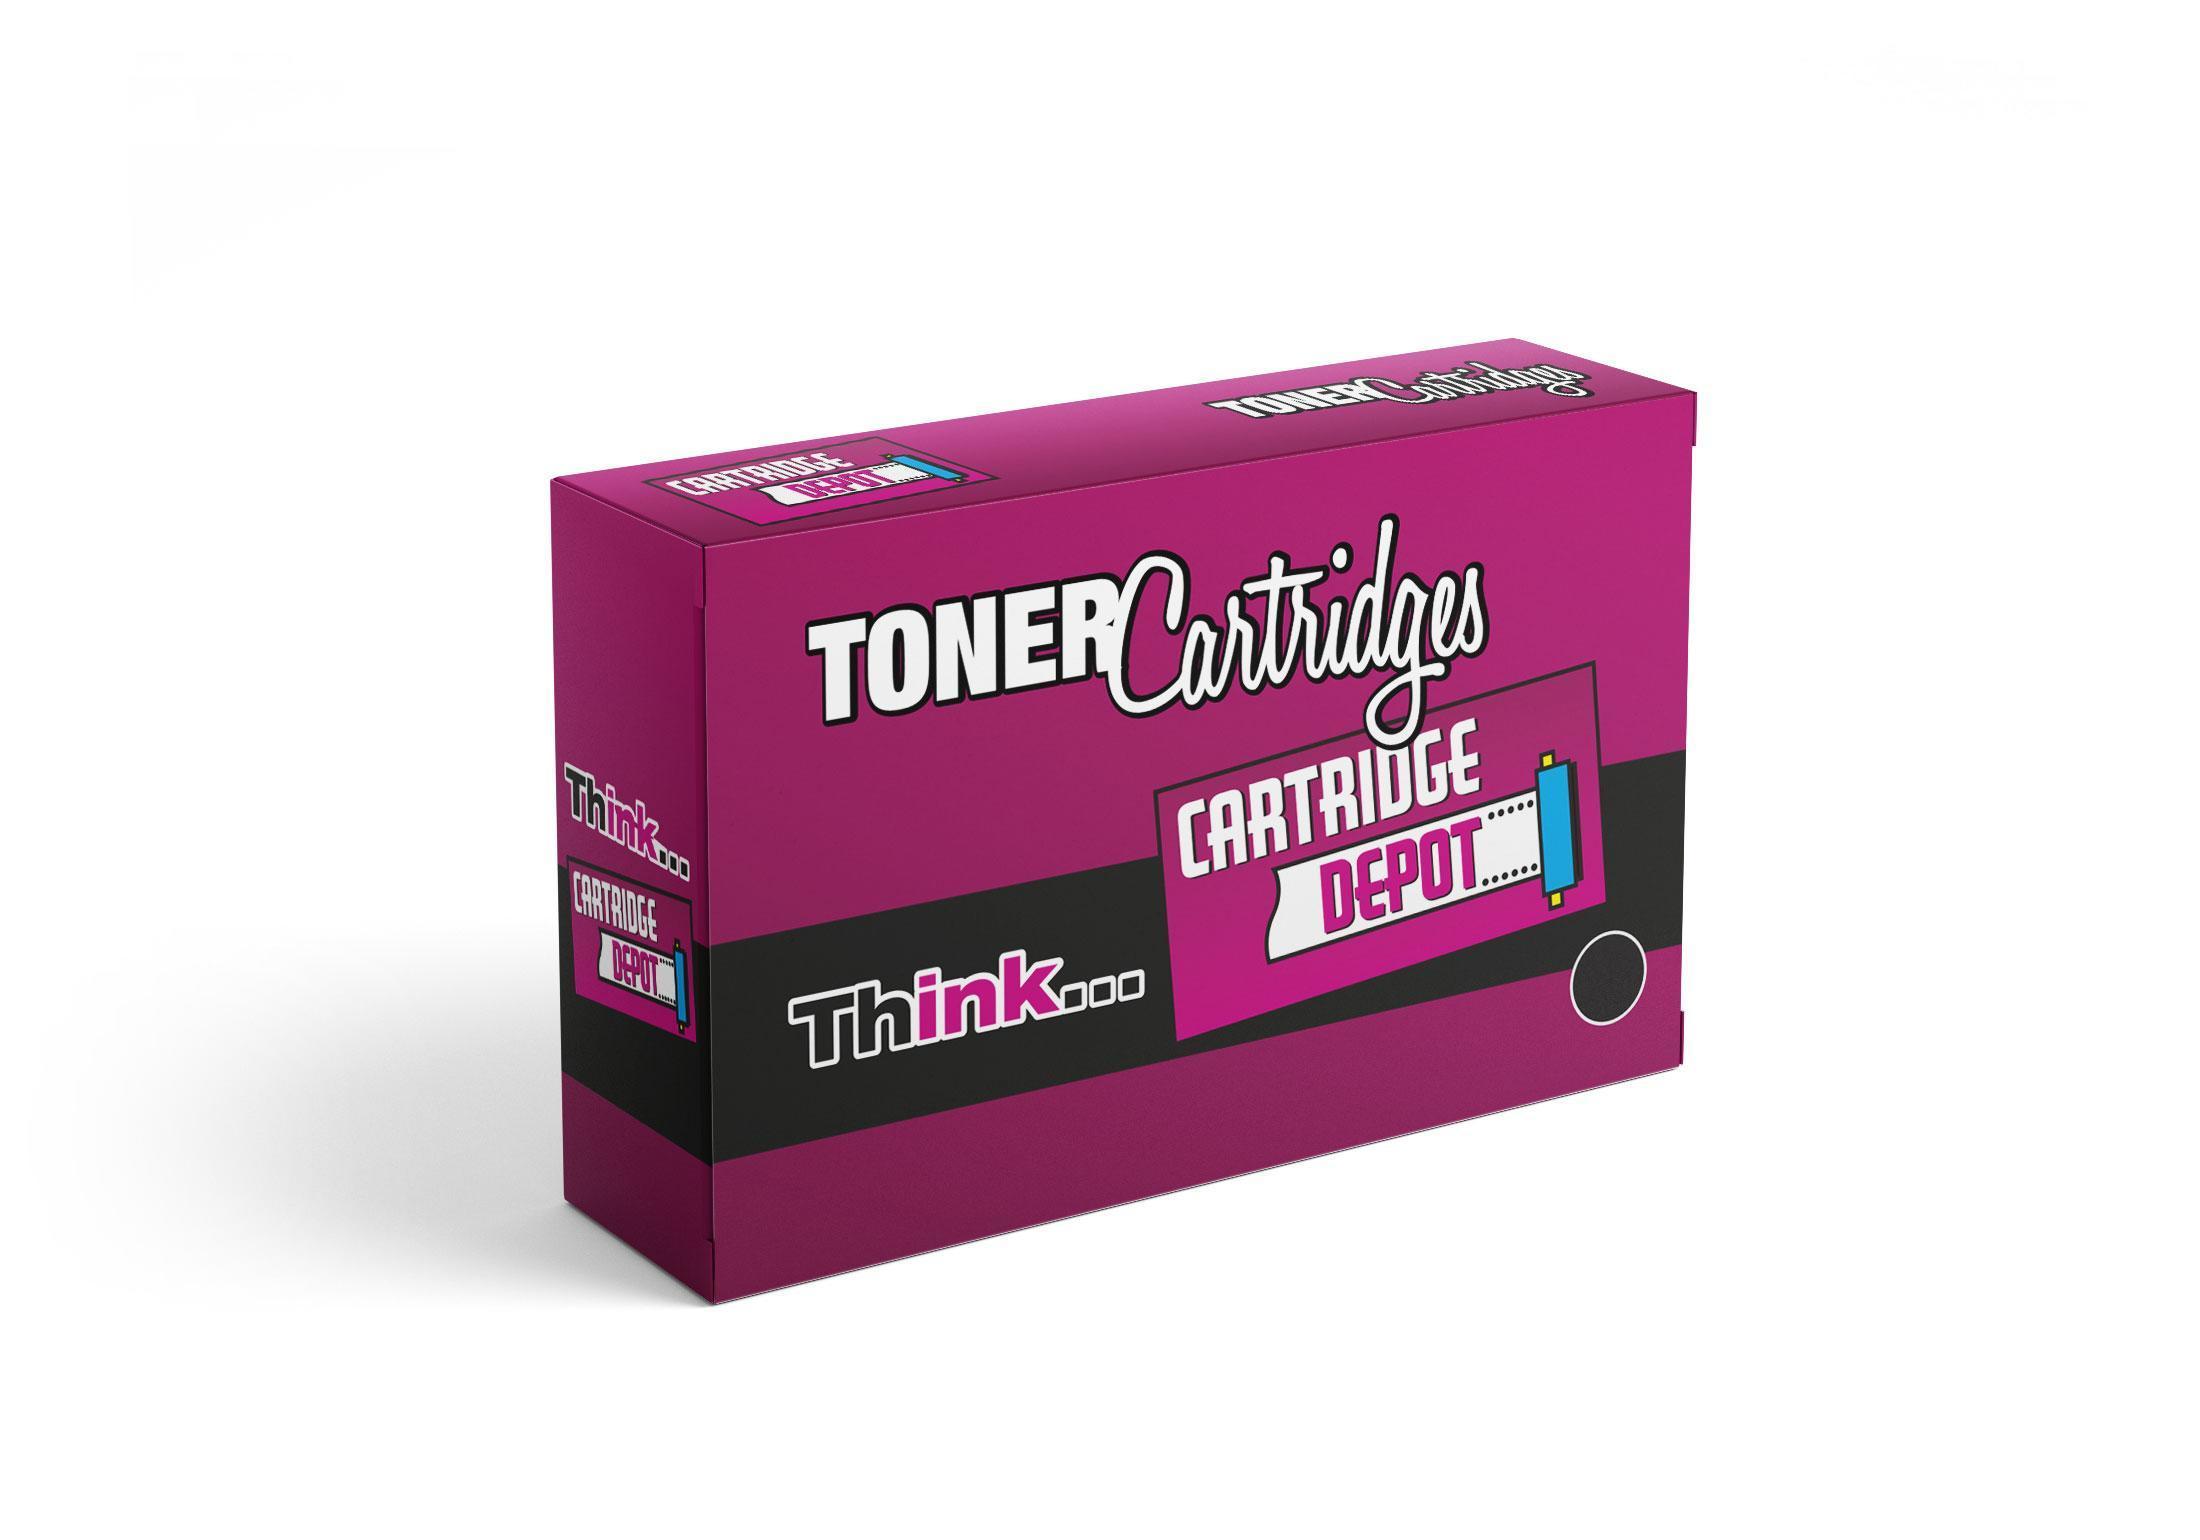 1 x TN423 - Black - Toner Cartridge - Compatible For Brother